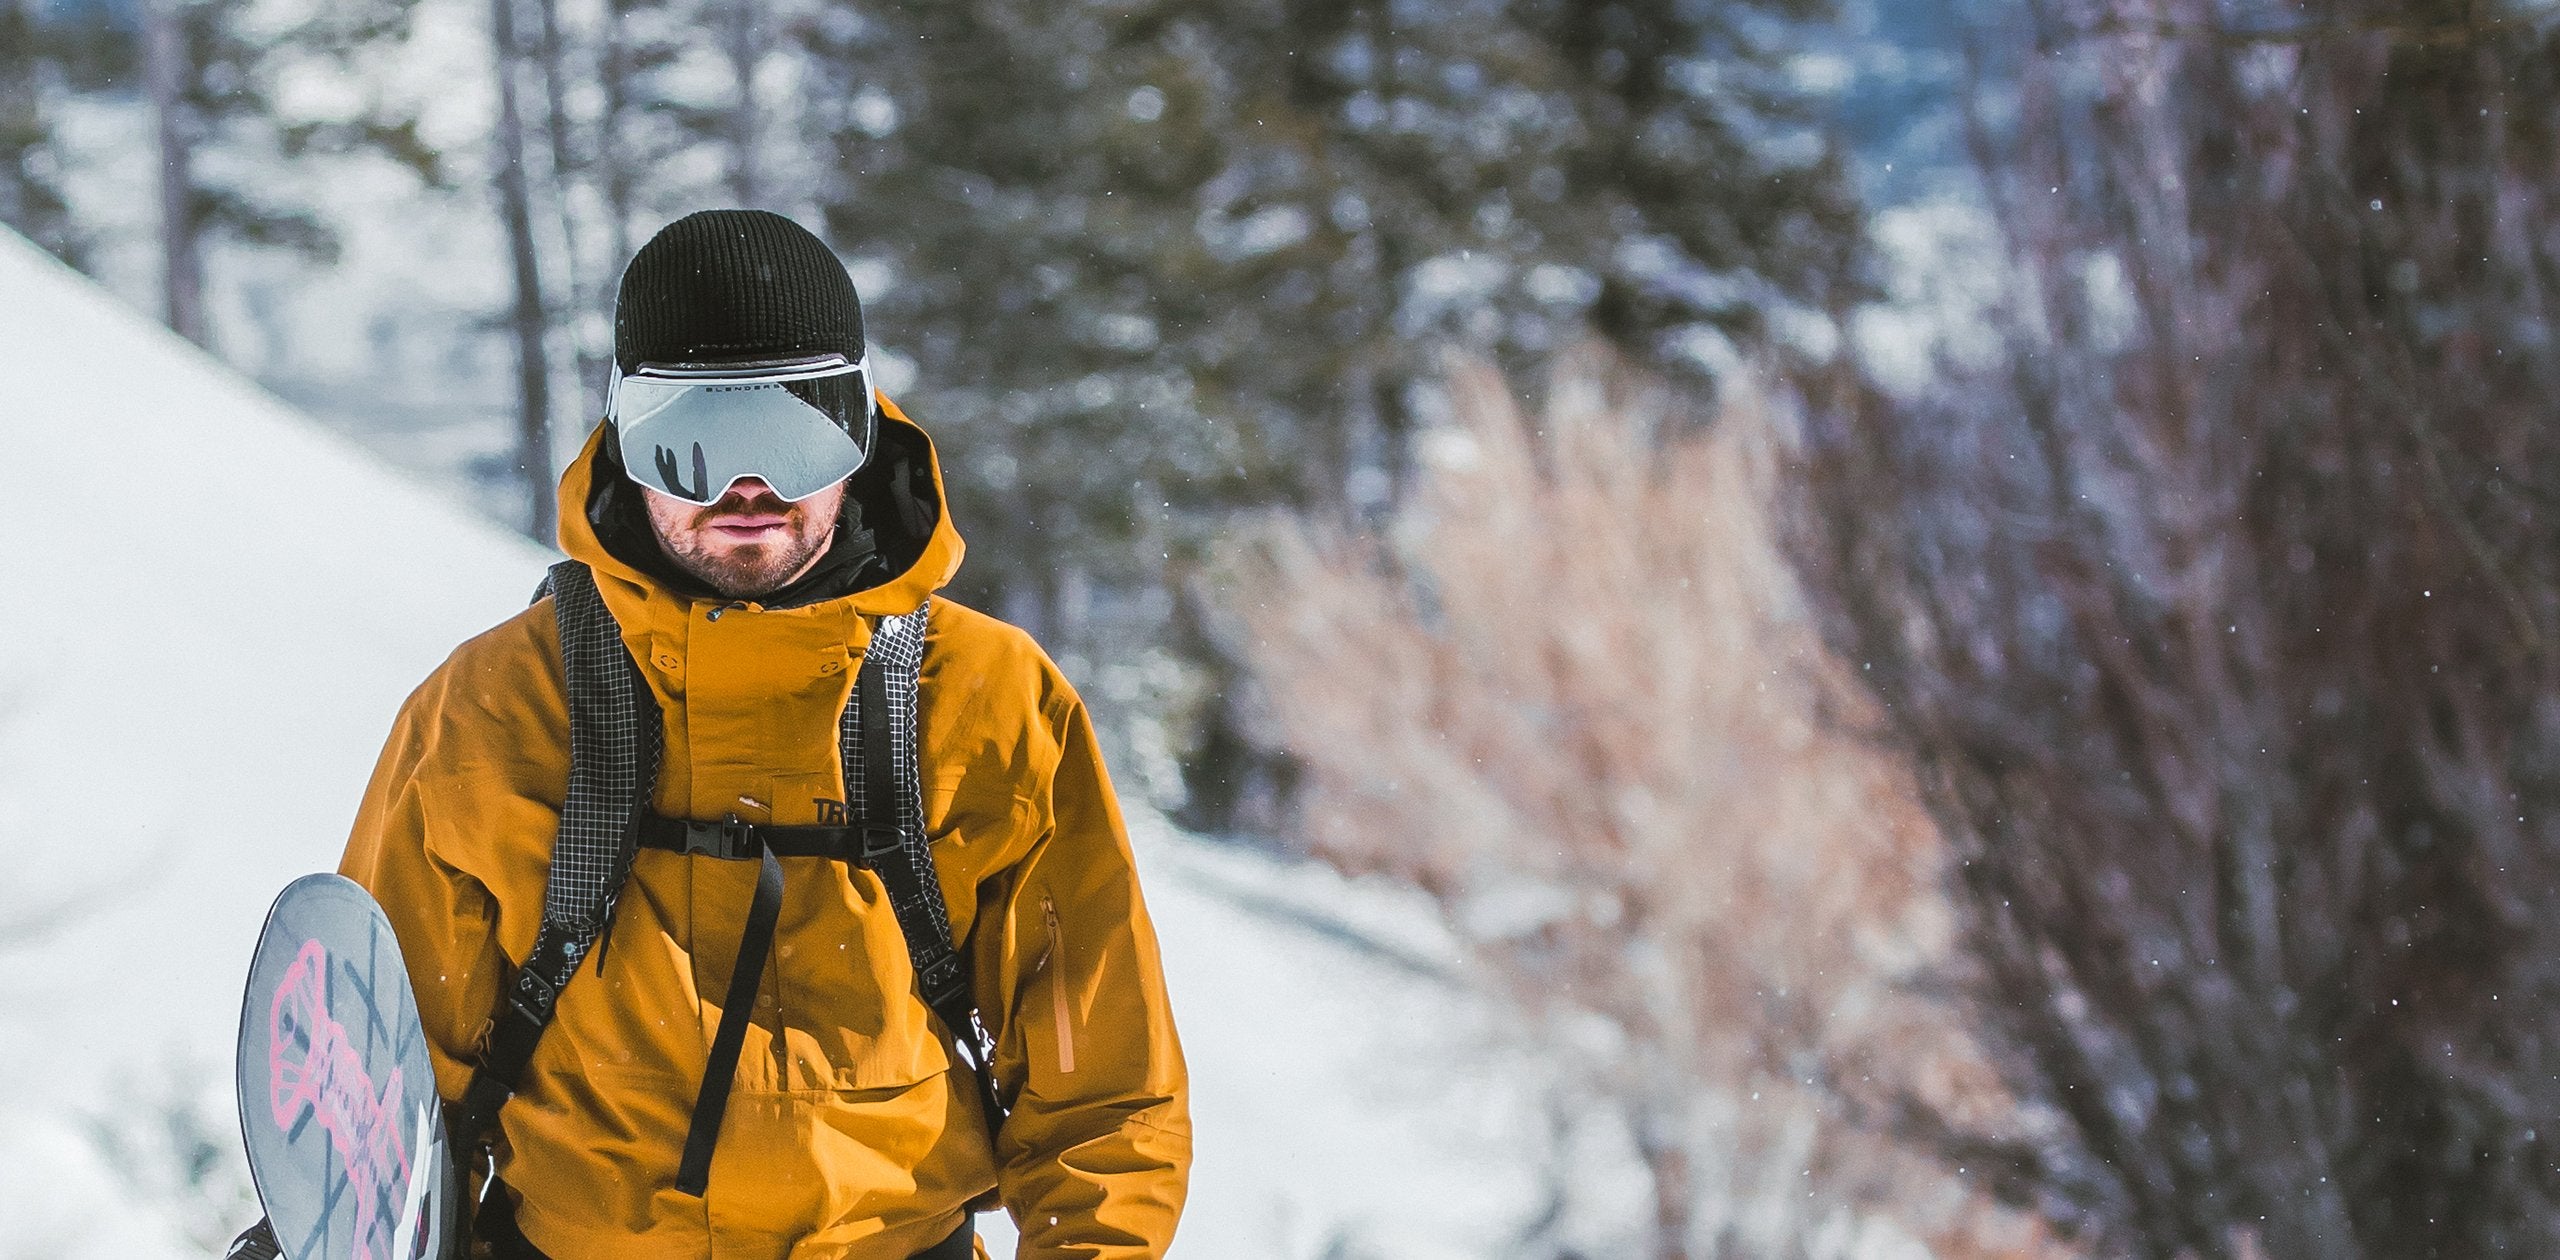 OTG Snow Goggles - Ski & Snowboard Goggles to Wear Over Your Glasses